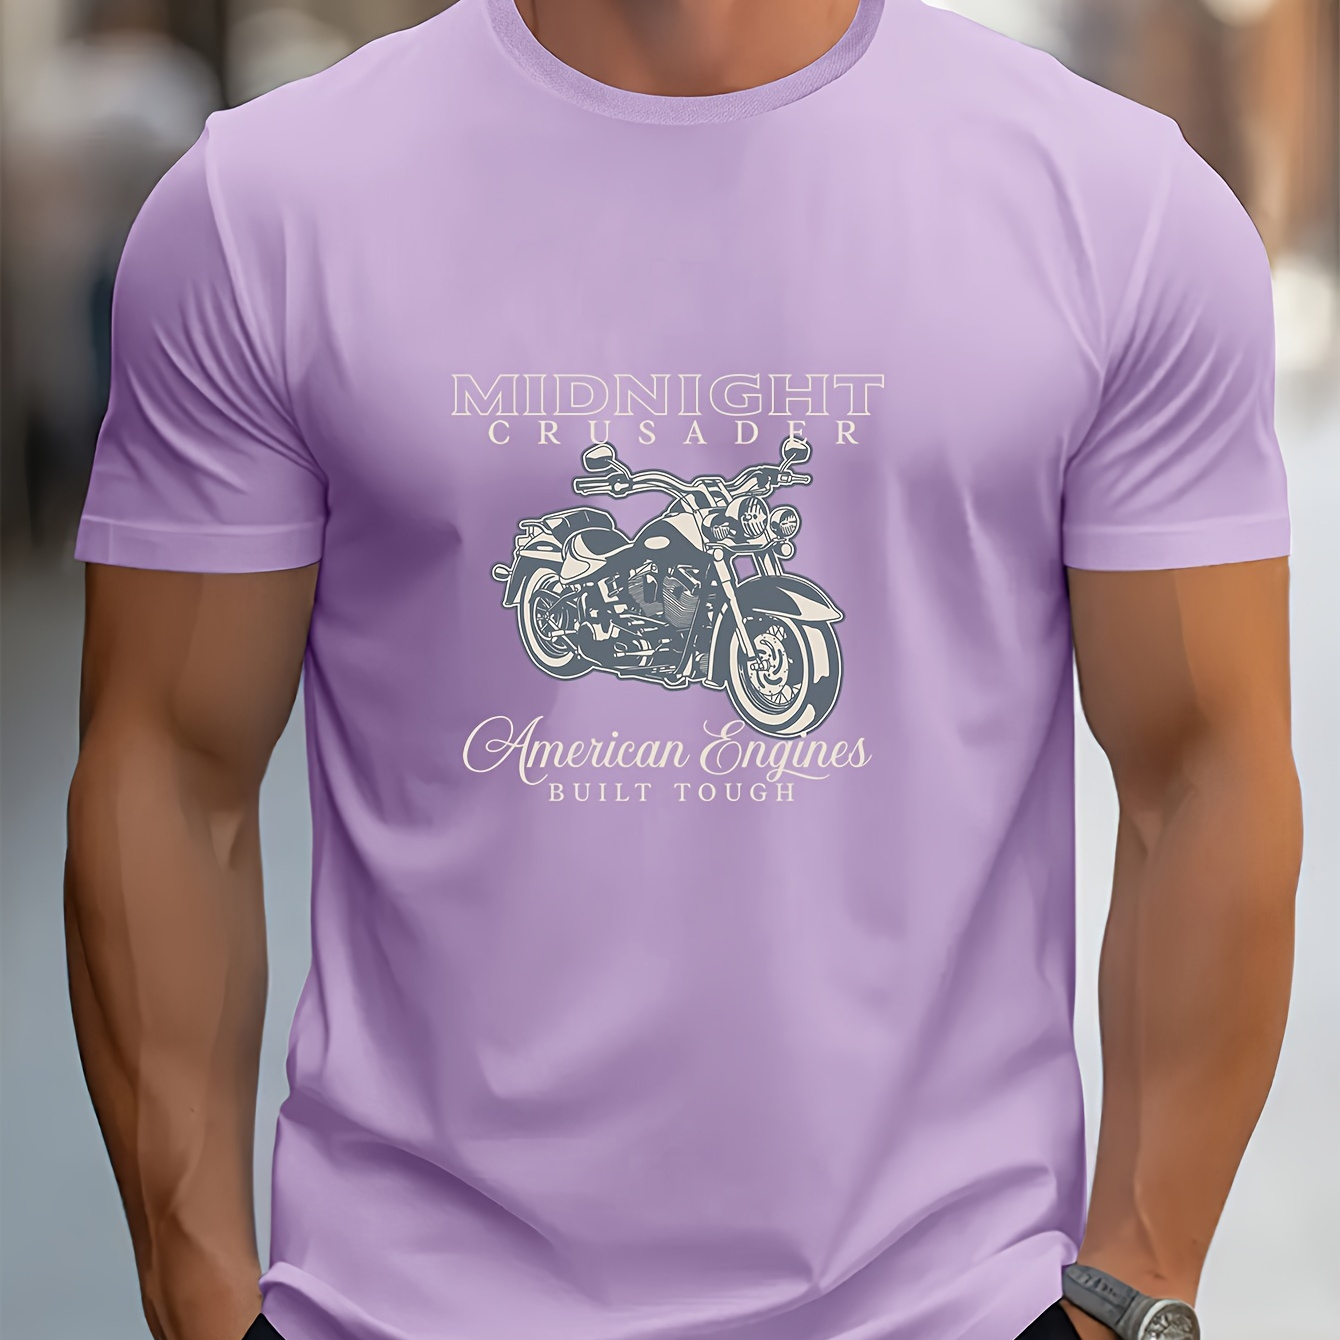 

Vintage Motorcycle Print Tees For Men, Casual Quick Drying Breathable T-shirt, Short Sleeve T-shirt For Running Training